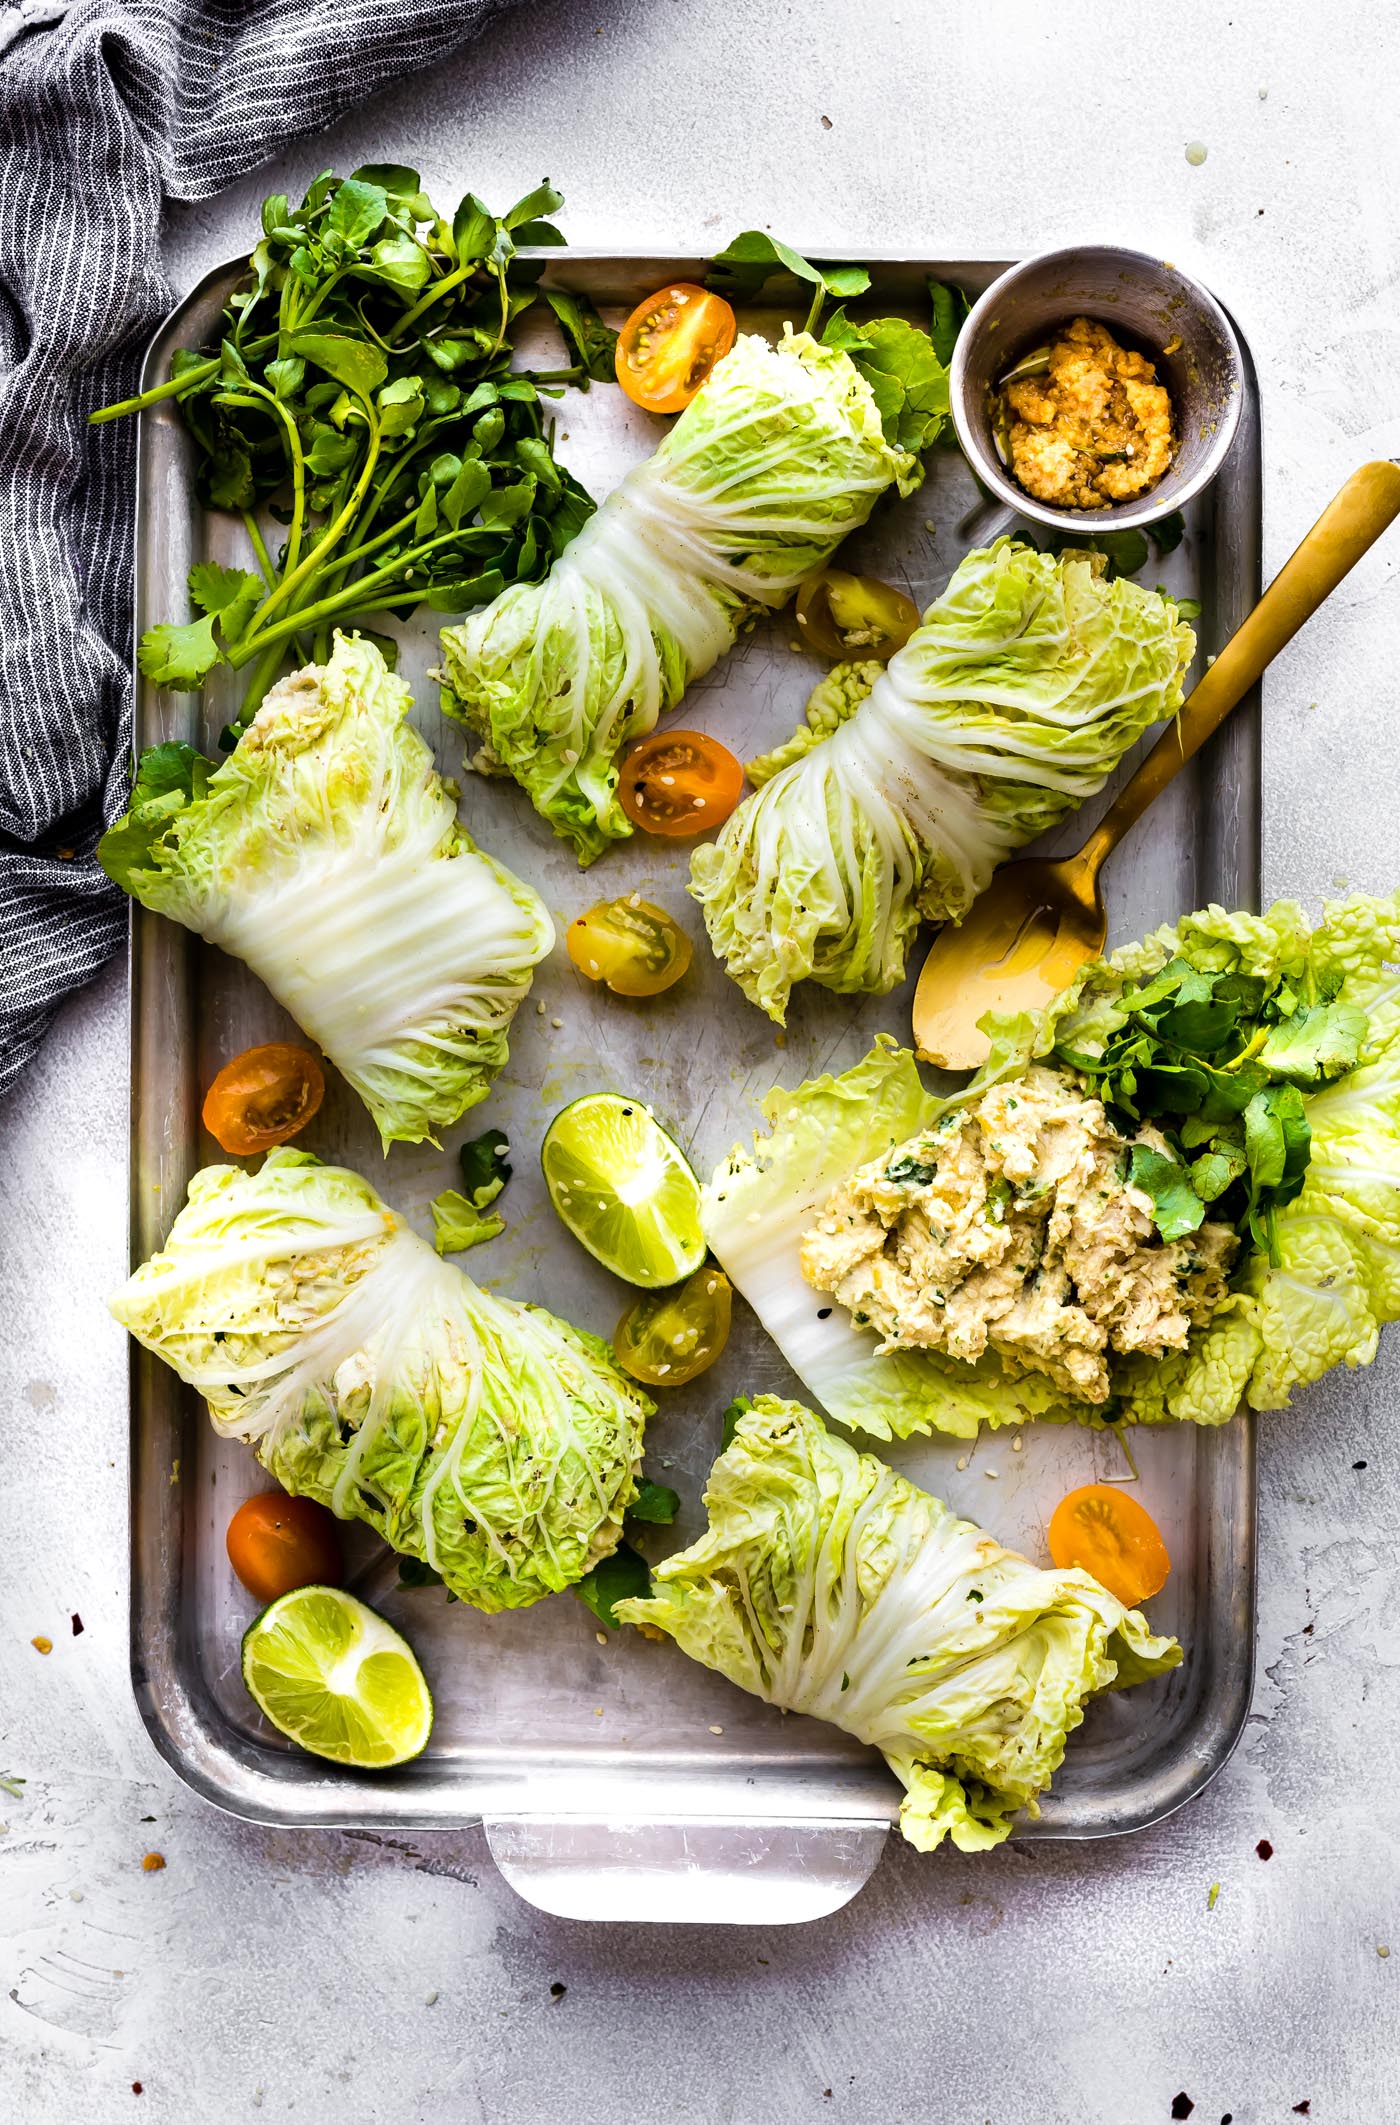 Miso Mango Chicken Salad Cabbage wraps are the perfect light low carb lunch that's easy to make! A mango chicken salad that's mayo free, paleo friendly, and flavorful! Spread the miso mango chicken salad mixture over napa cabbage, add a little bit of watercress, then firmly roll up! Bam, a perfectly handy lunch or light dinner!